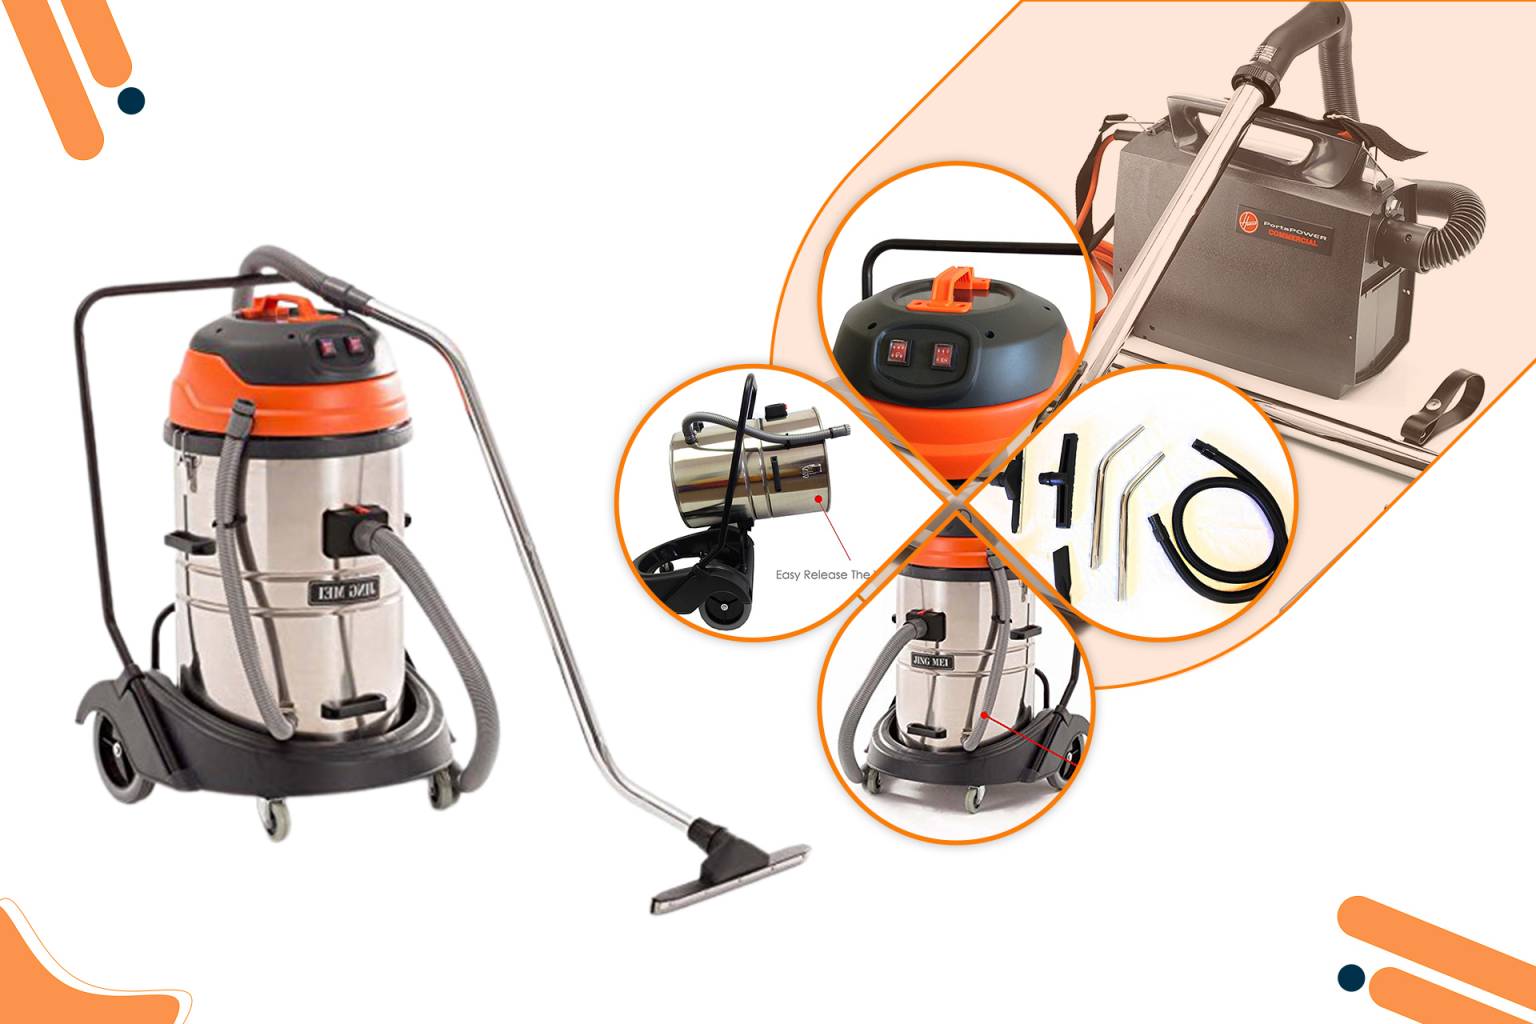 Top 5 Best Commercial Vacuum Cleaners in 2022